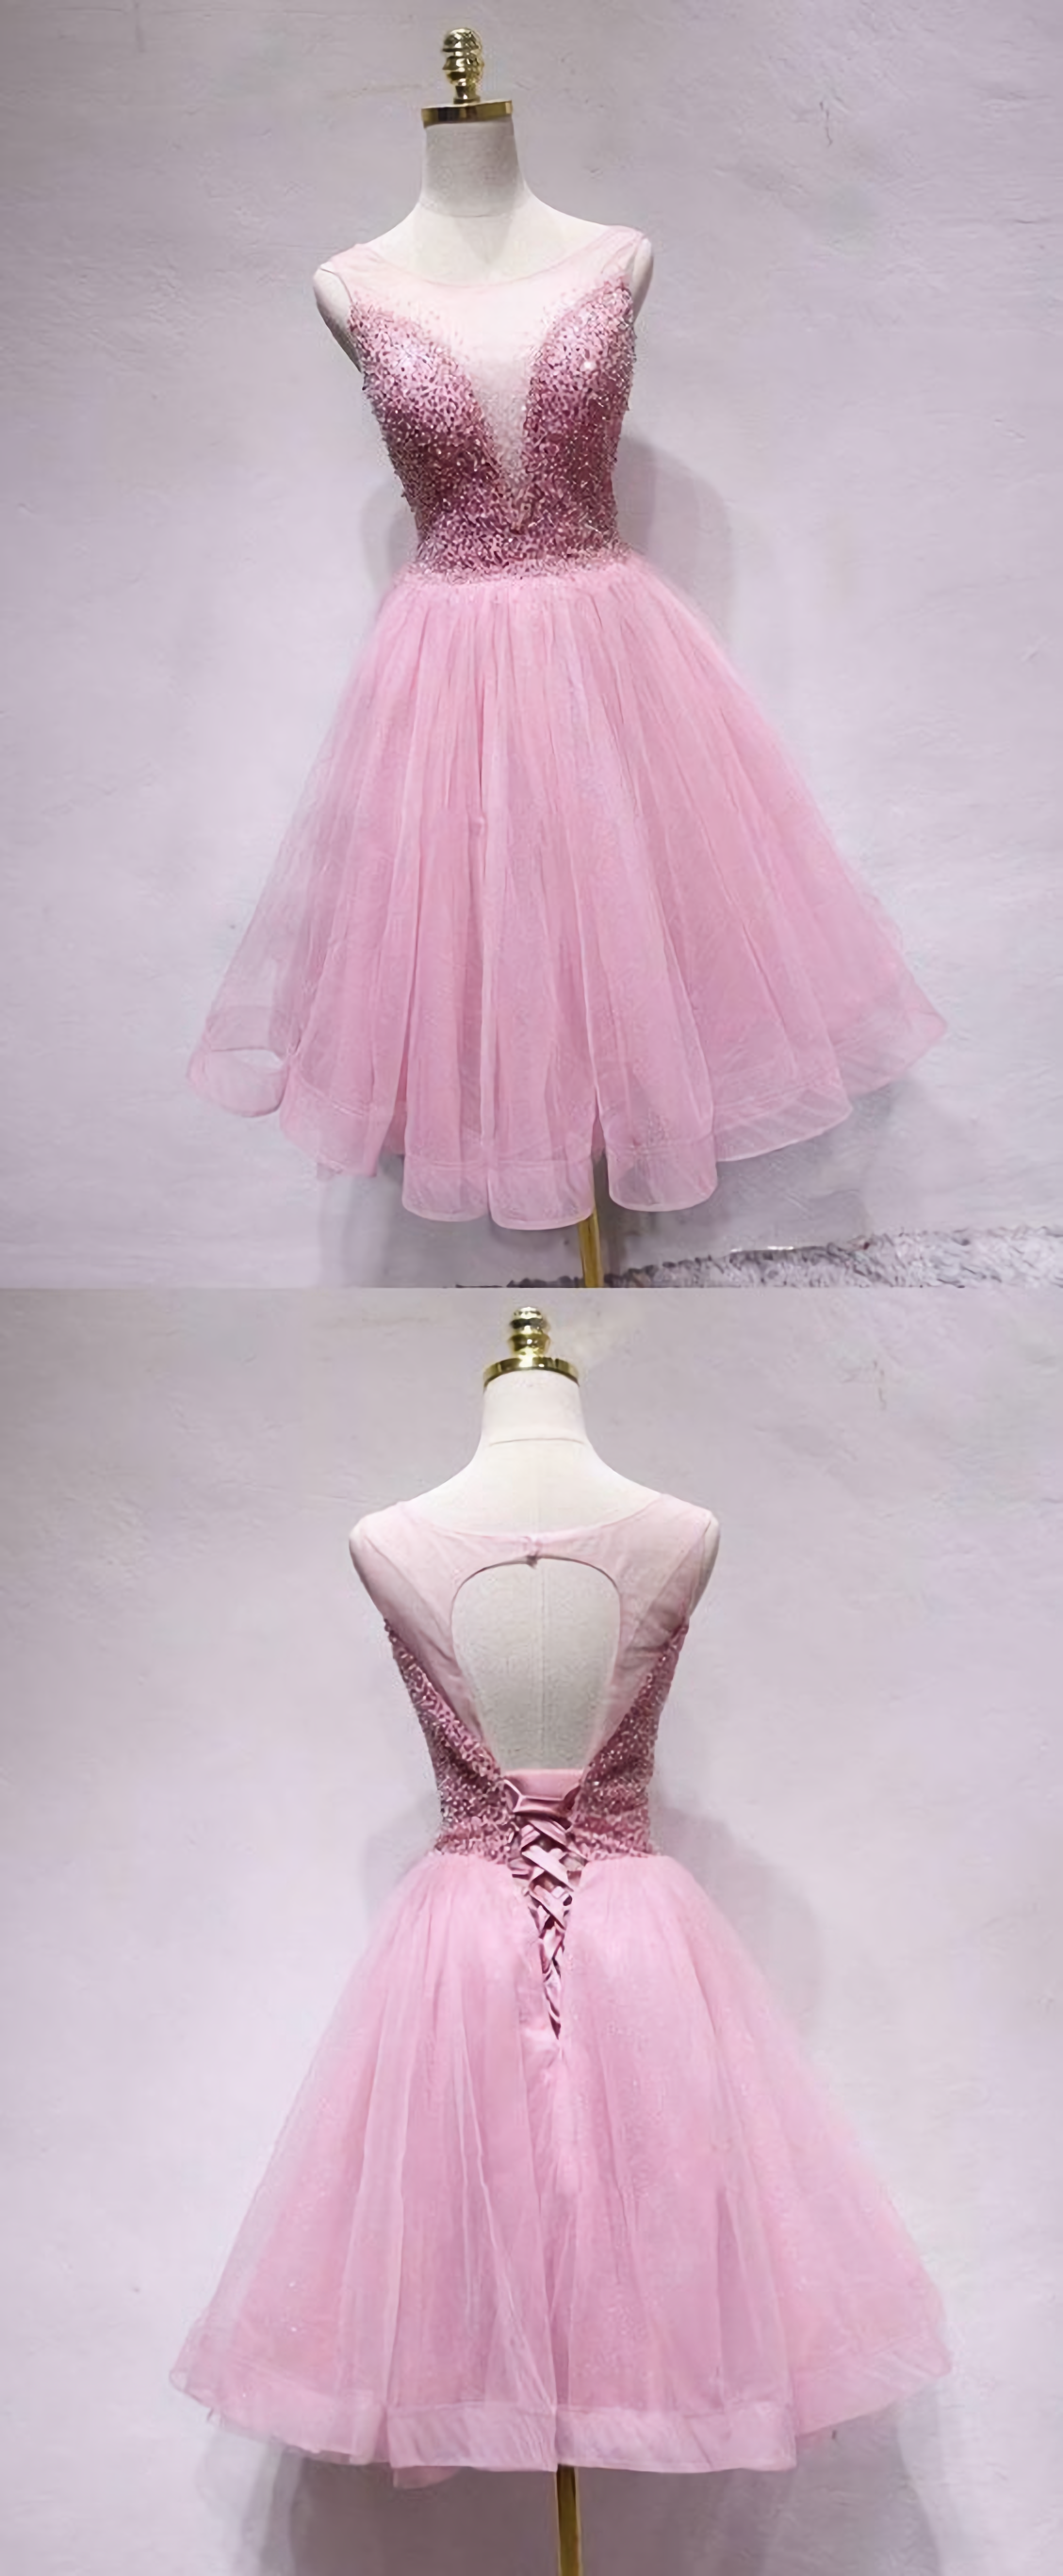 Homecoming Dress Sweetheart, Spark Queen Pink Tulle Sequin Short Prom Dress, Pink Homecoming Dress